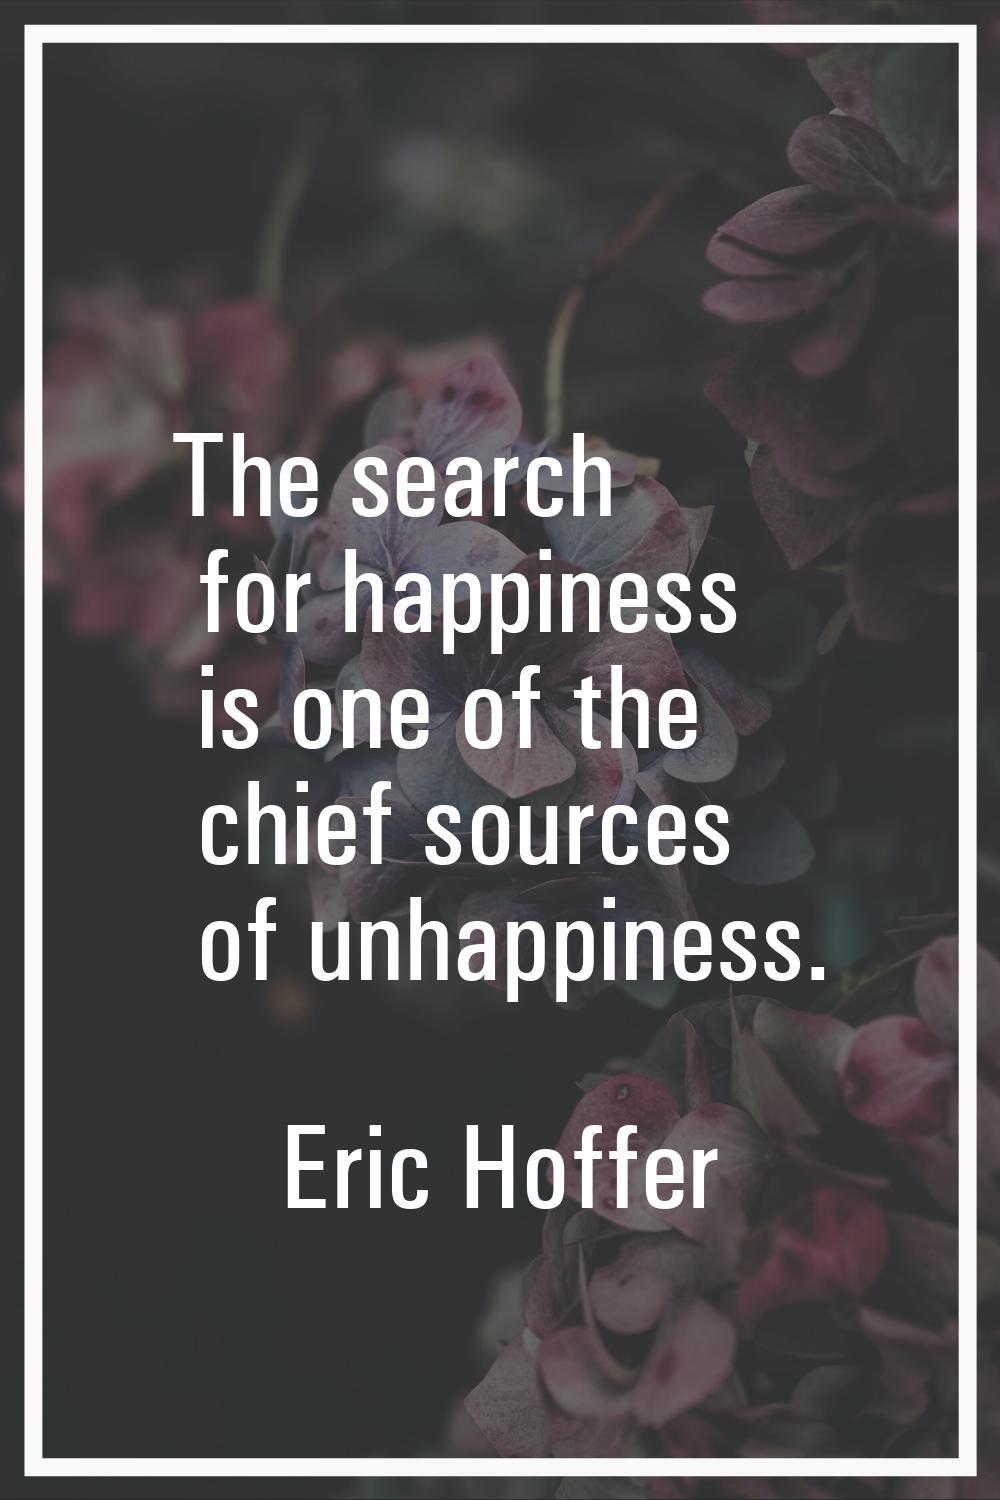 The search for happiness is one of the chief sources of unhappiness.